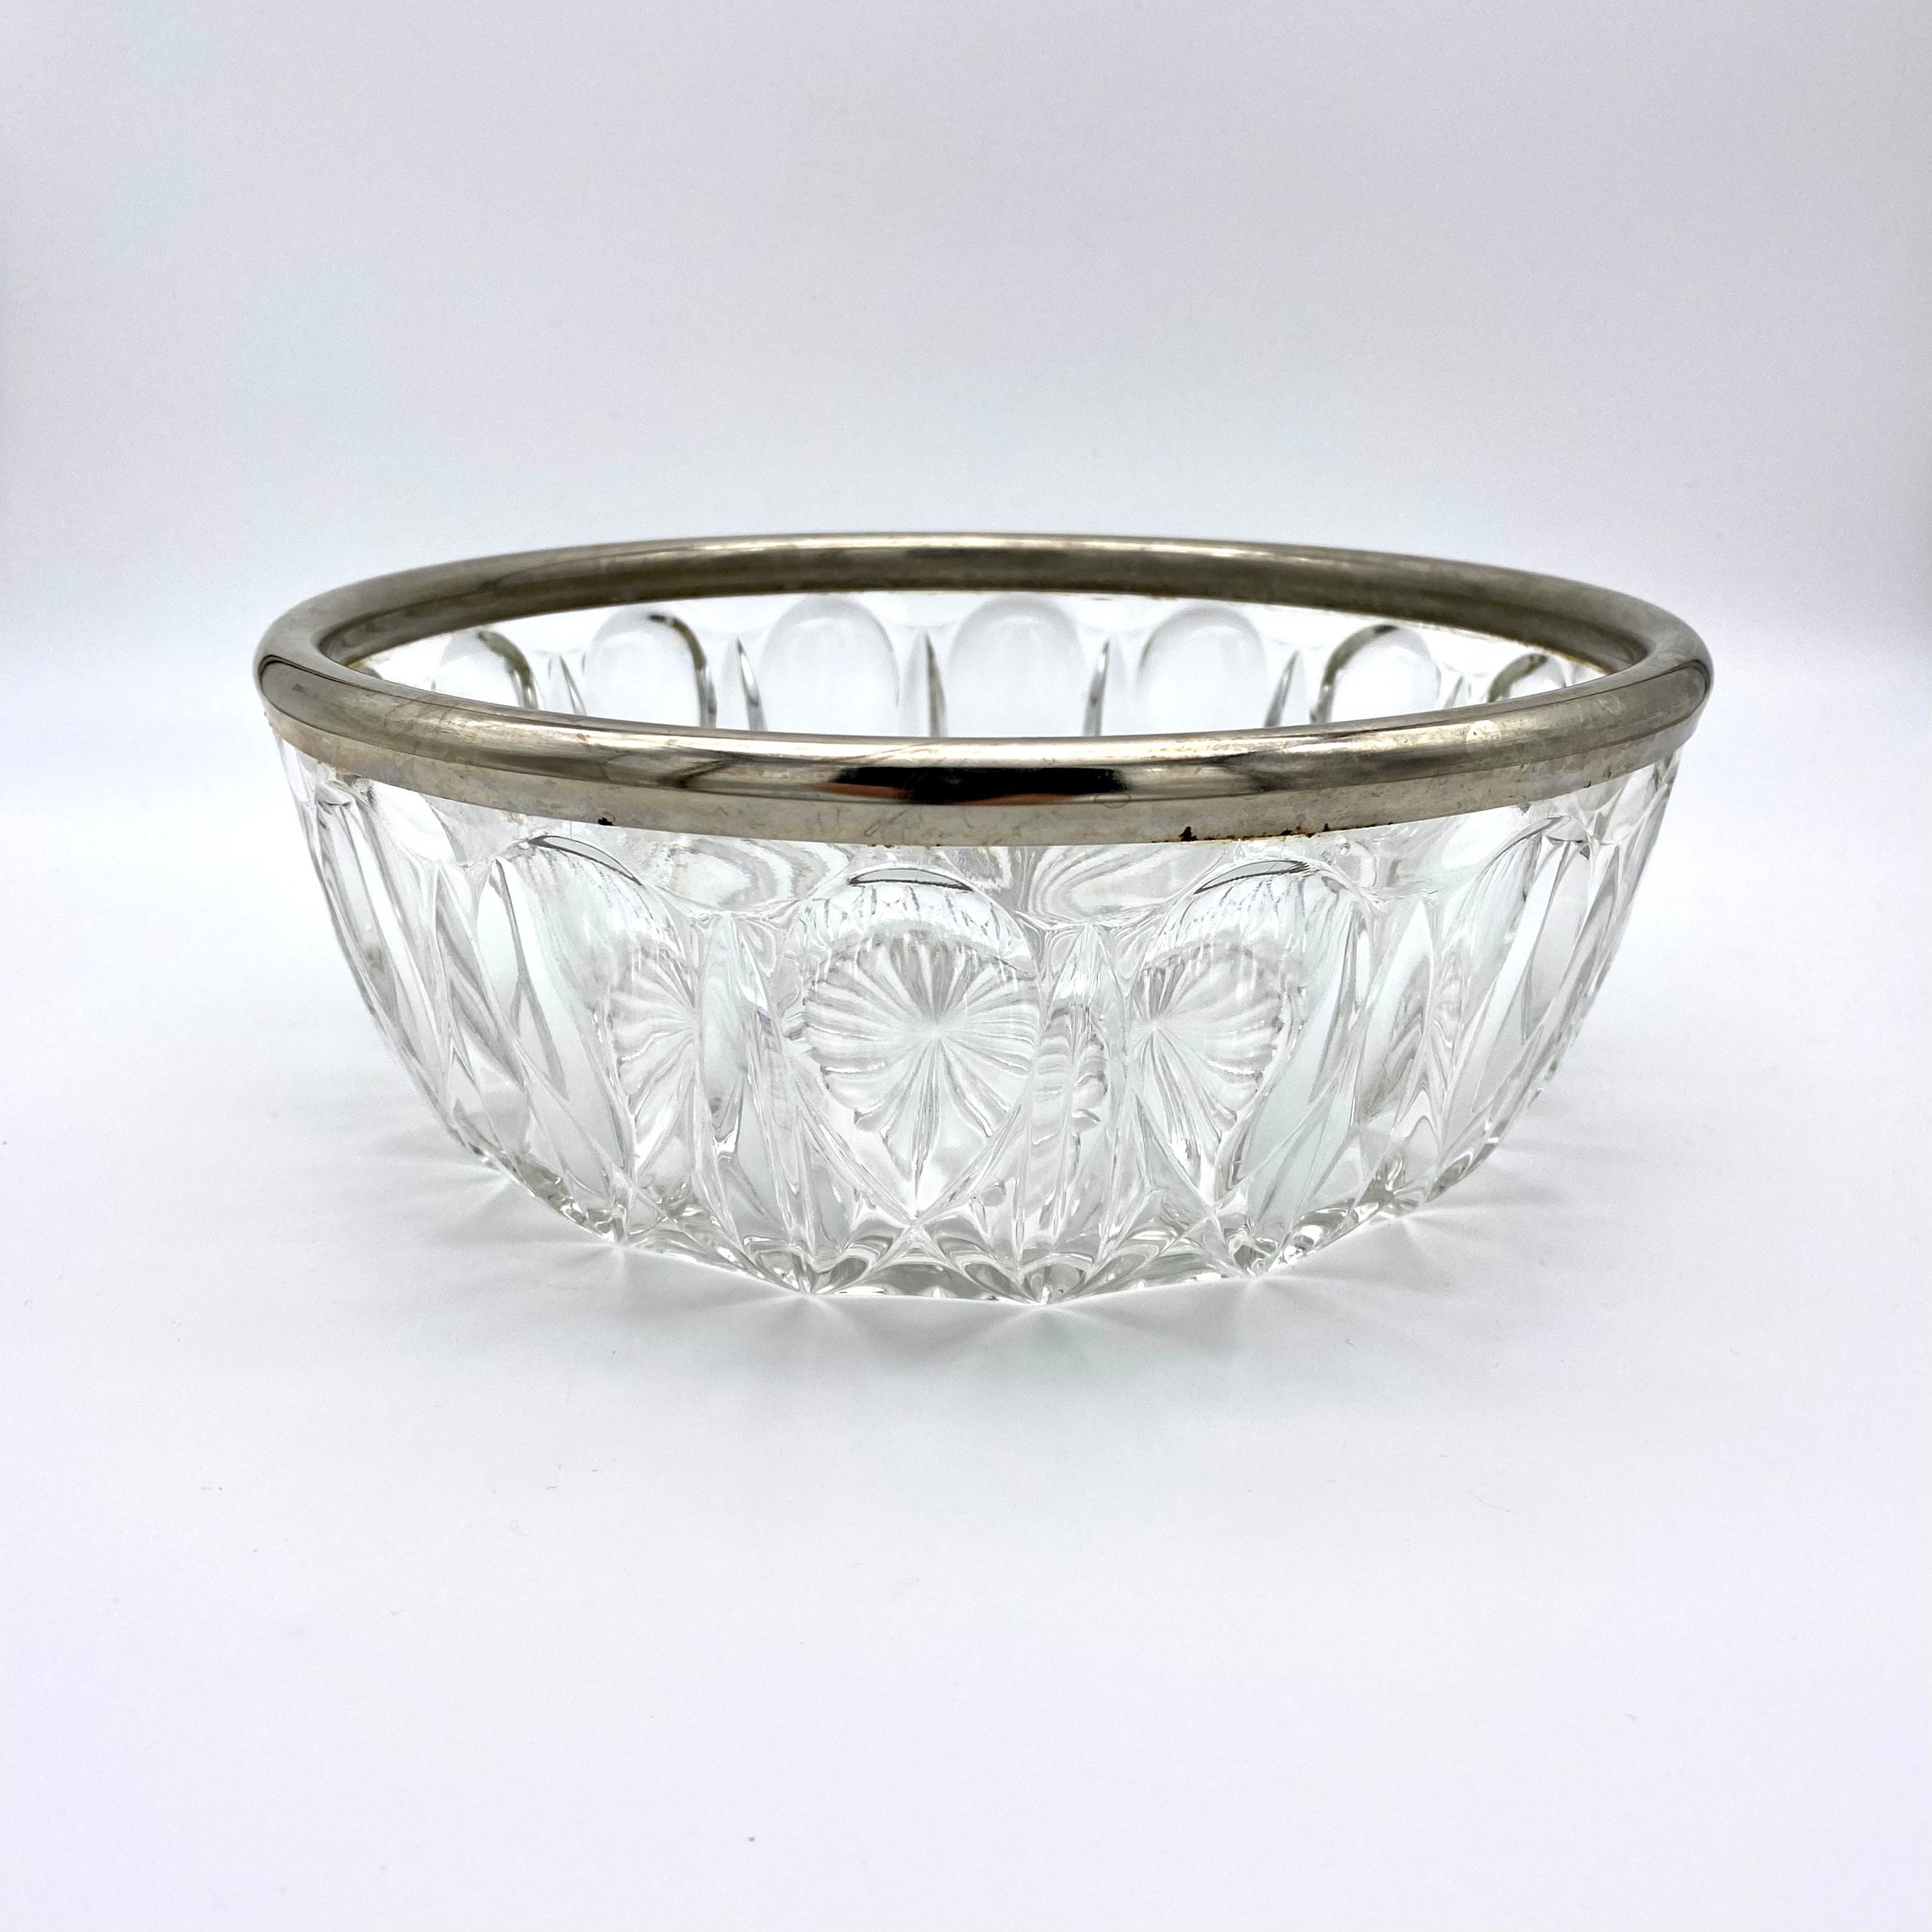 LARGE GLASS SALAD BOWL WITH A METAL RING.